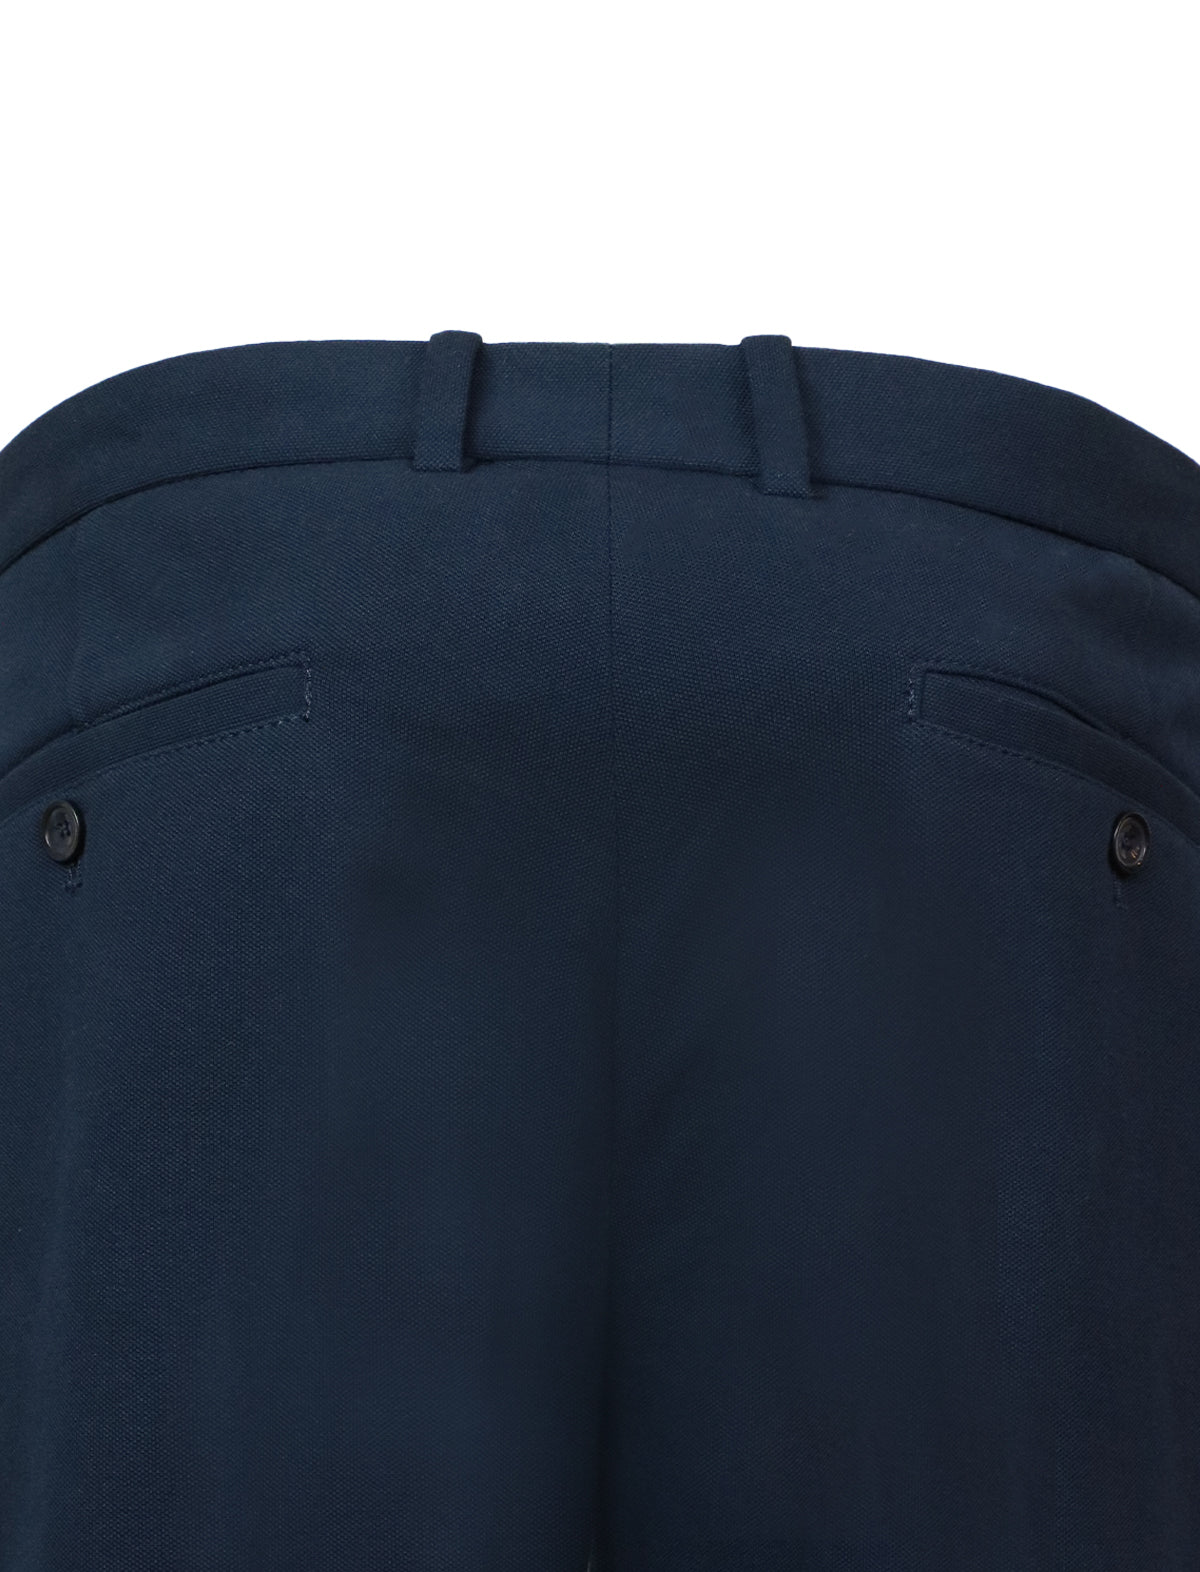 CIRCOLO 1901 Tailored Pants in Blue Navy